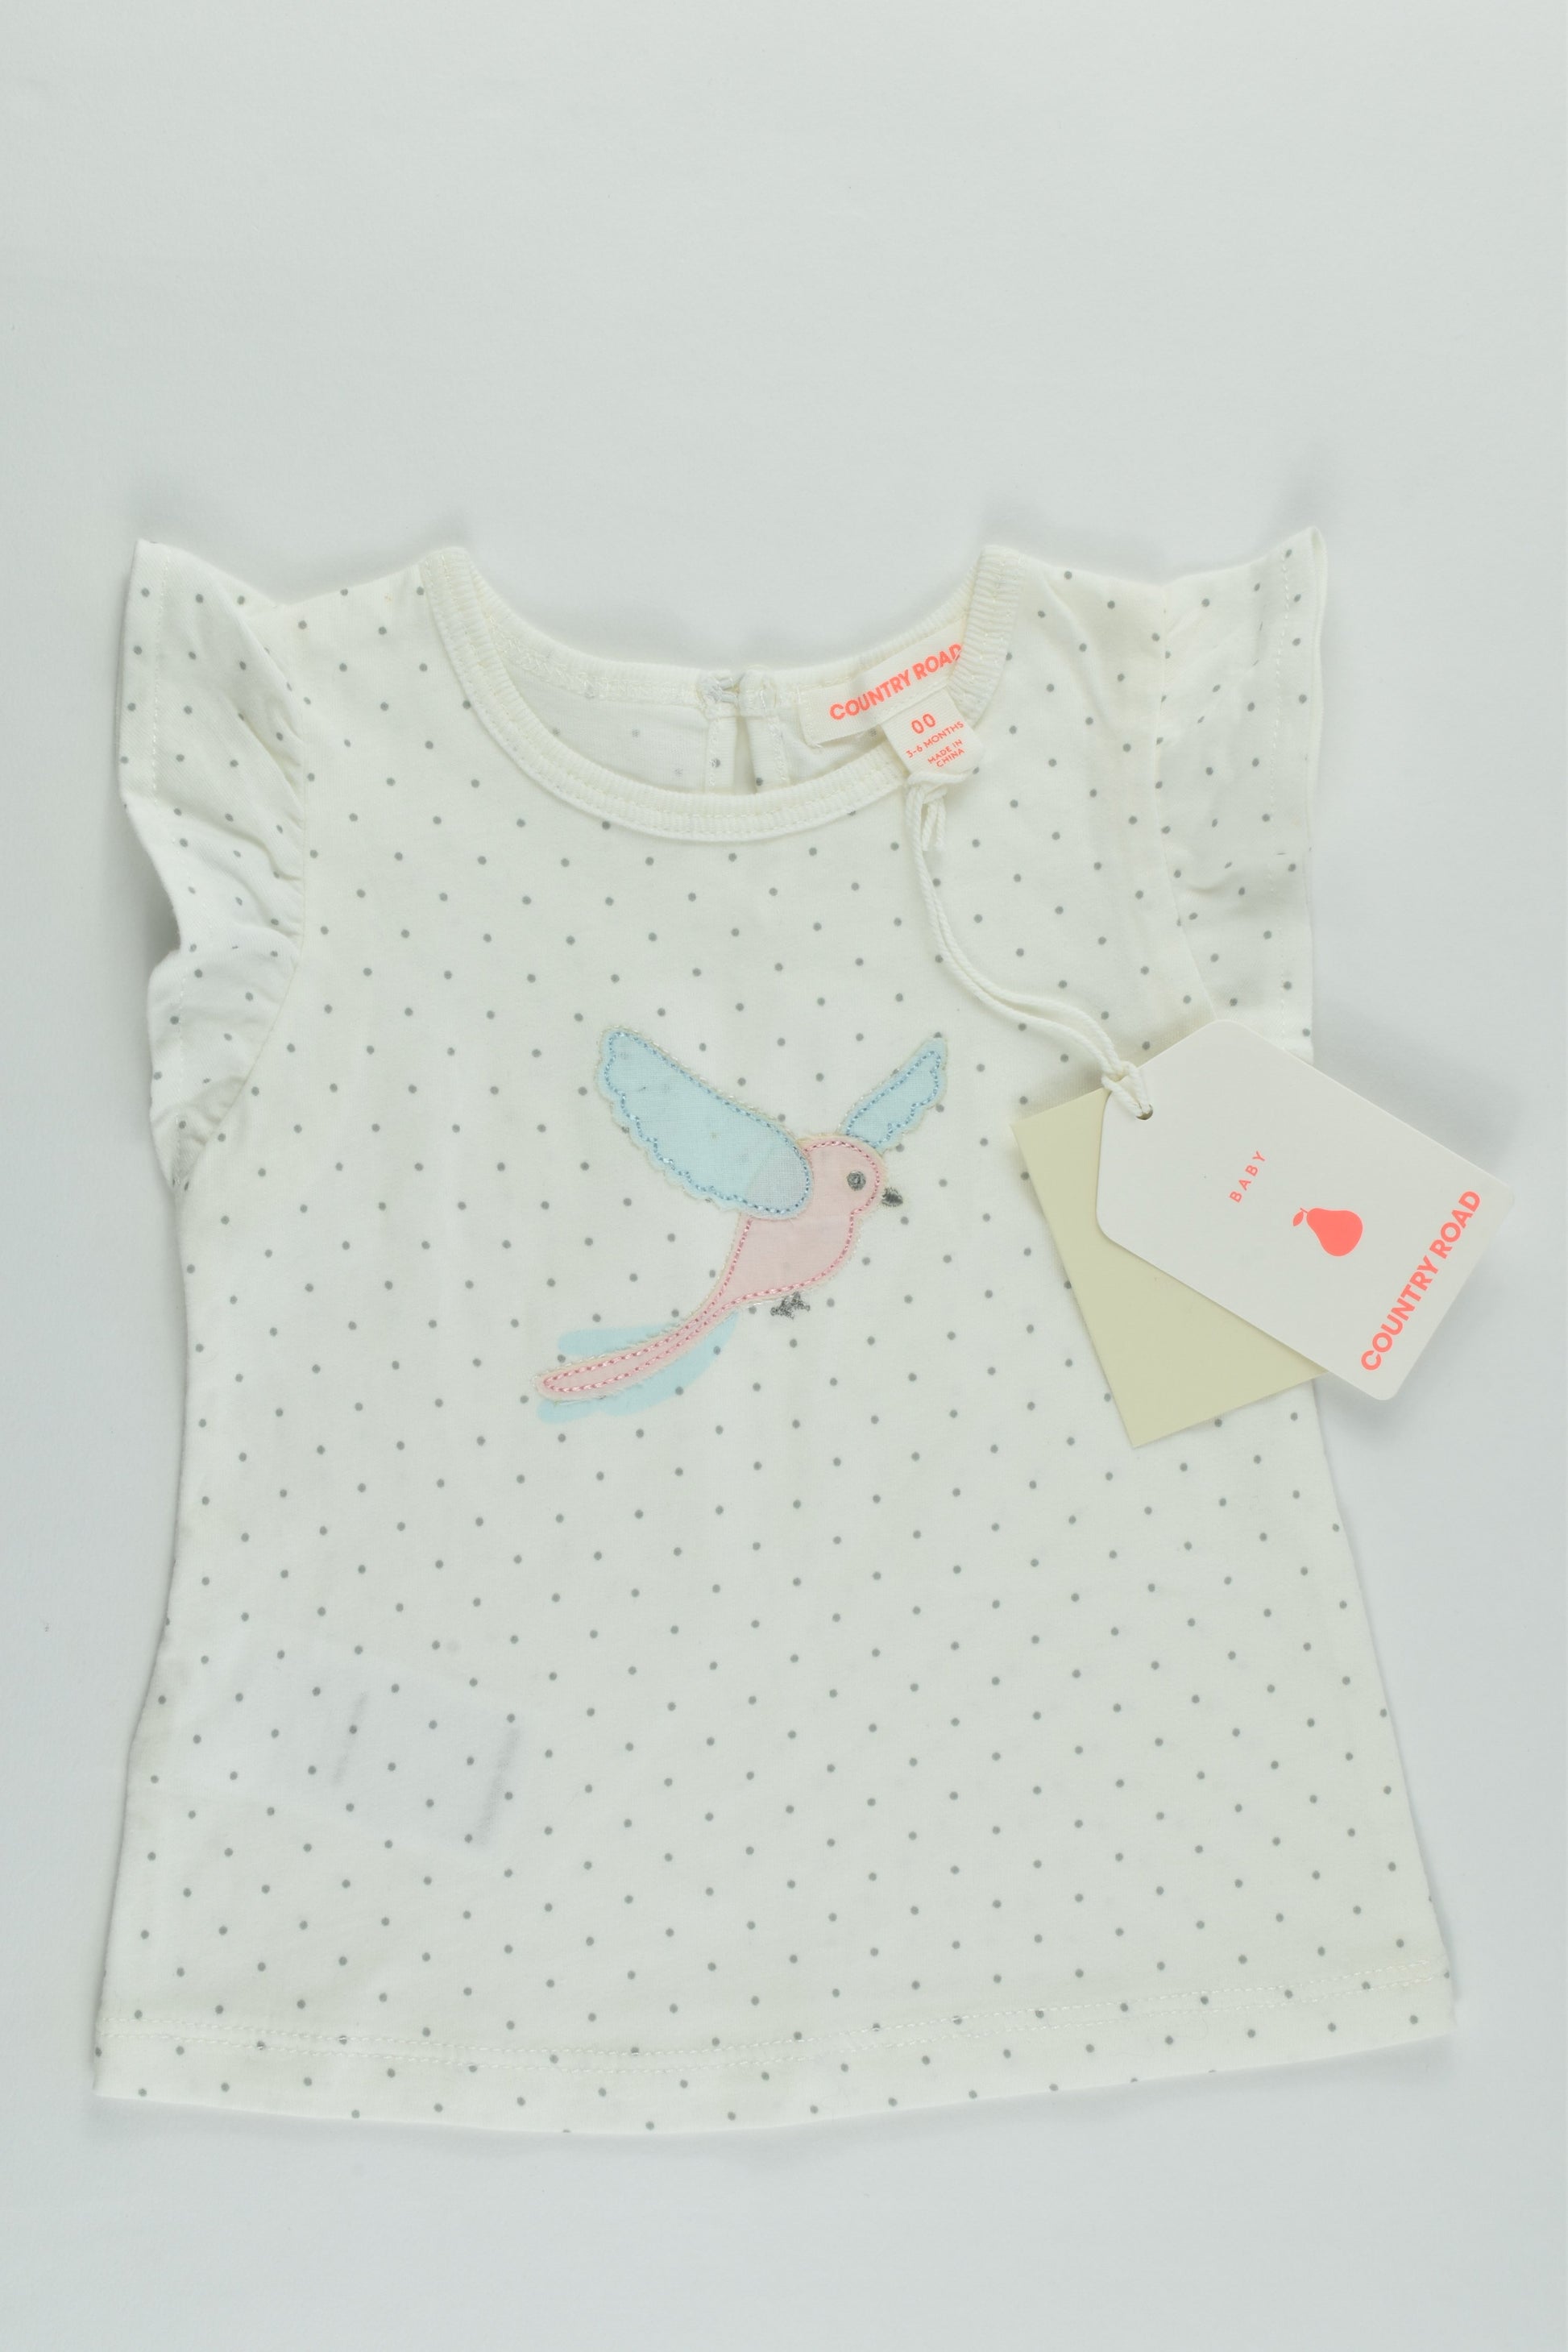 NEW Country Road Size 00 (3-6 months) Bird T-shirt